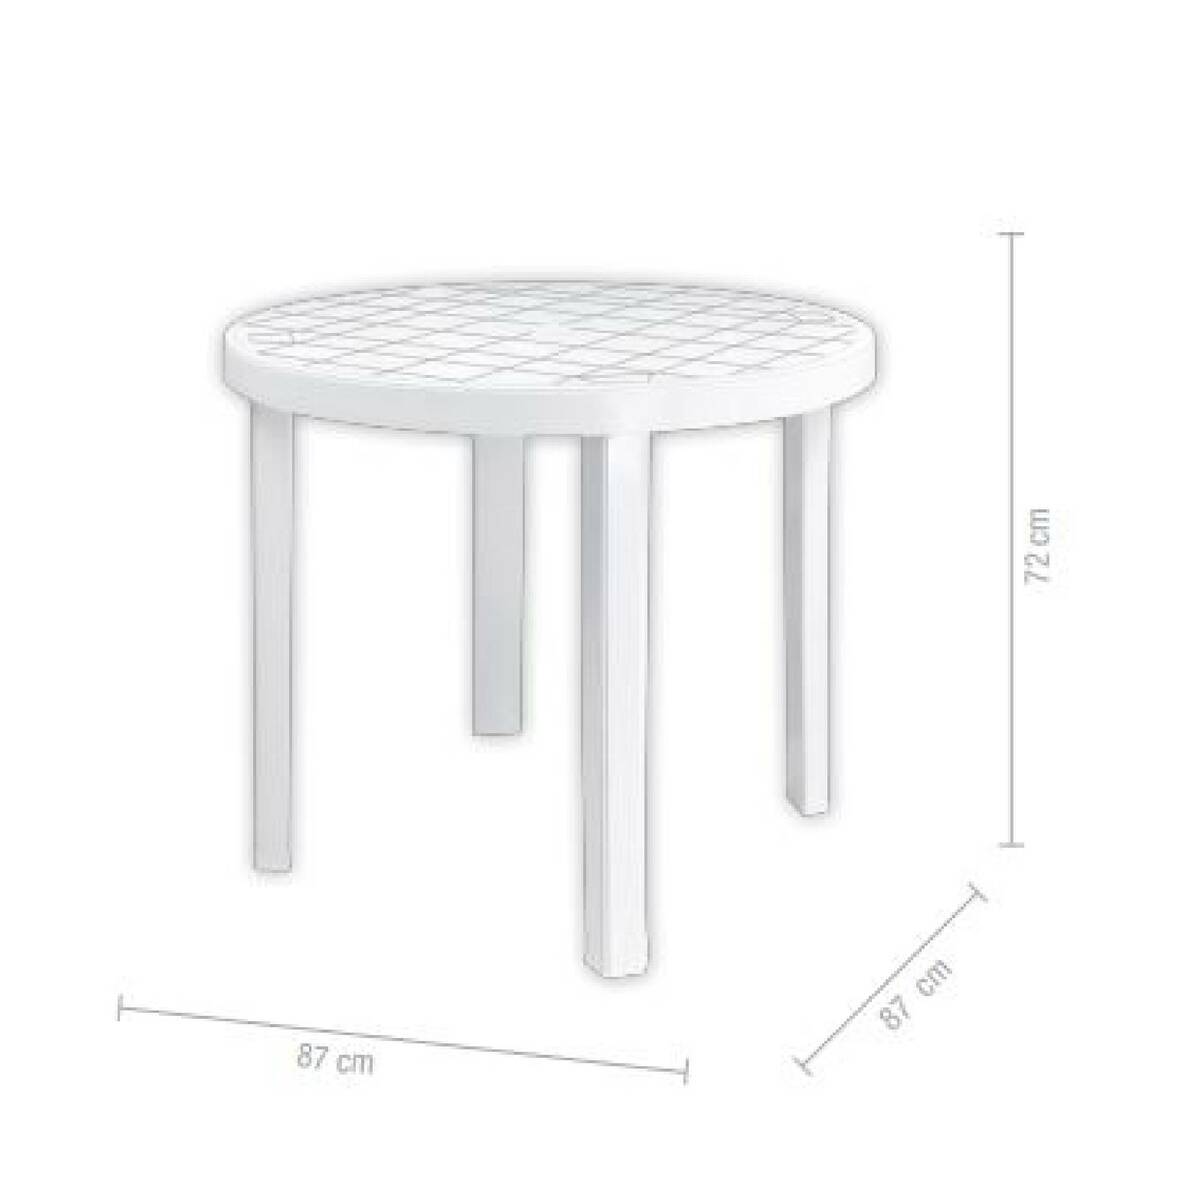 Picnic Garden Tolomeo Round Table H:72xDia:87cm Assorted Colors